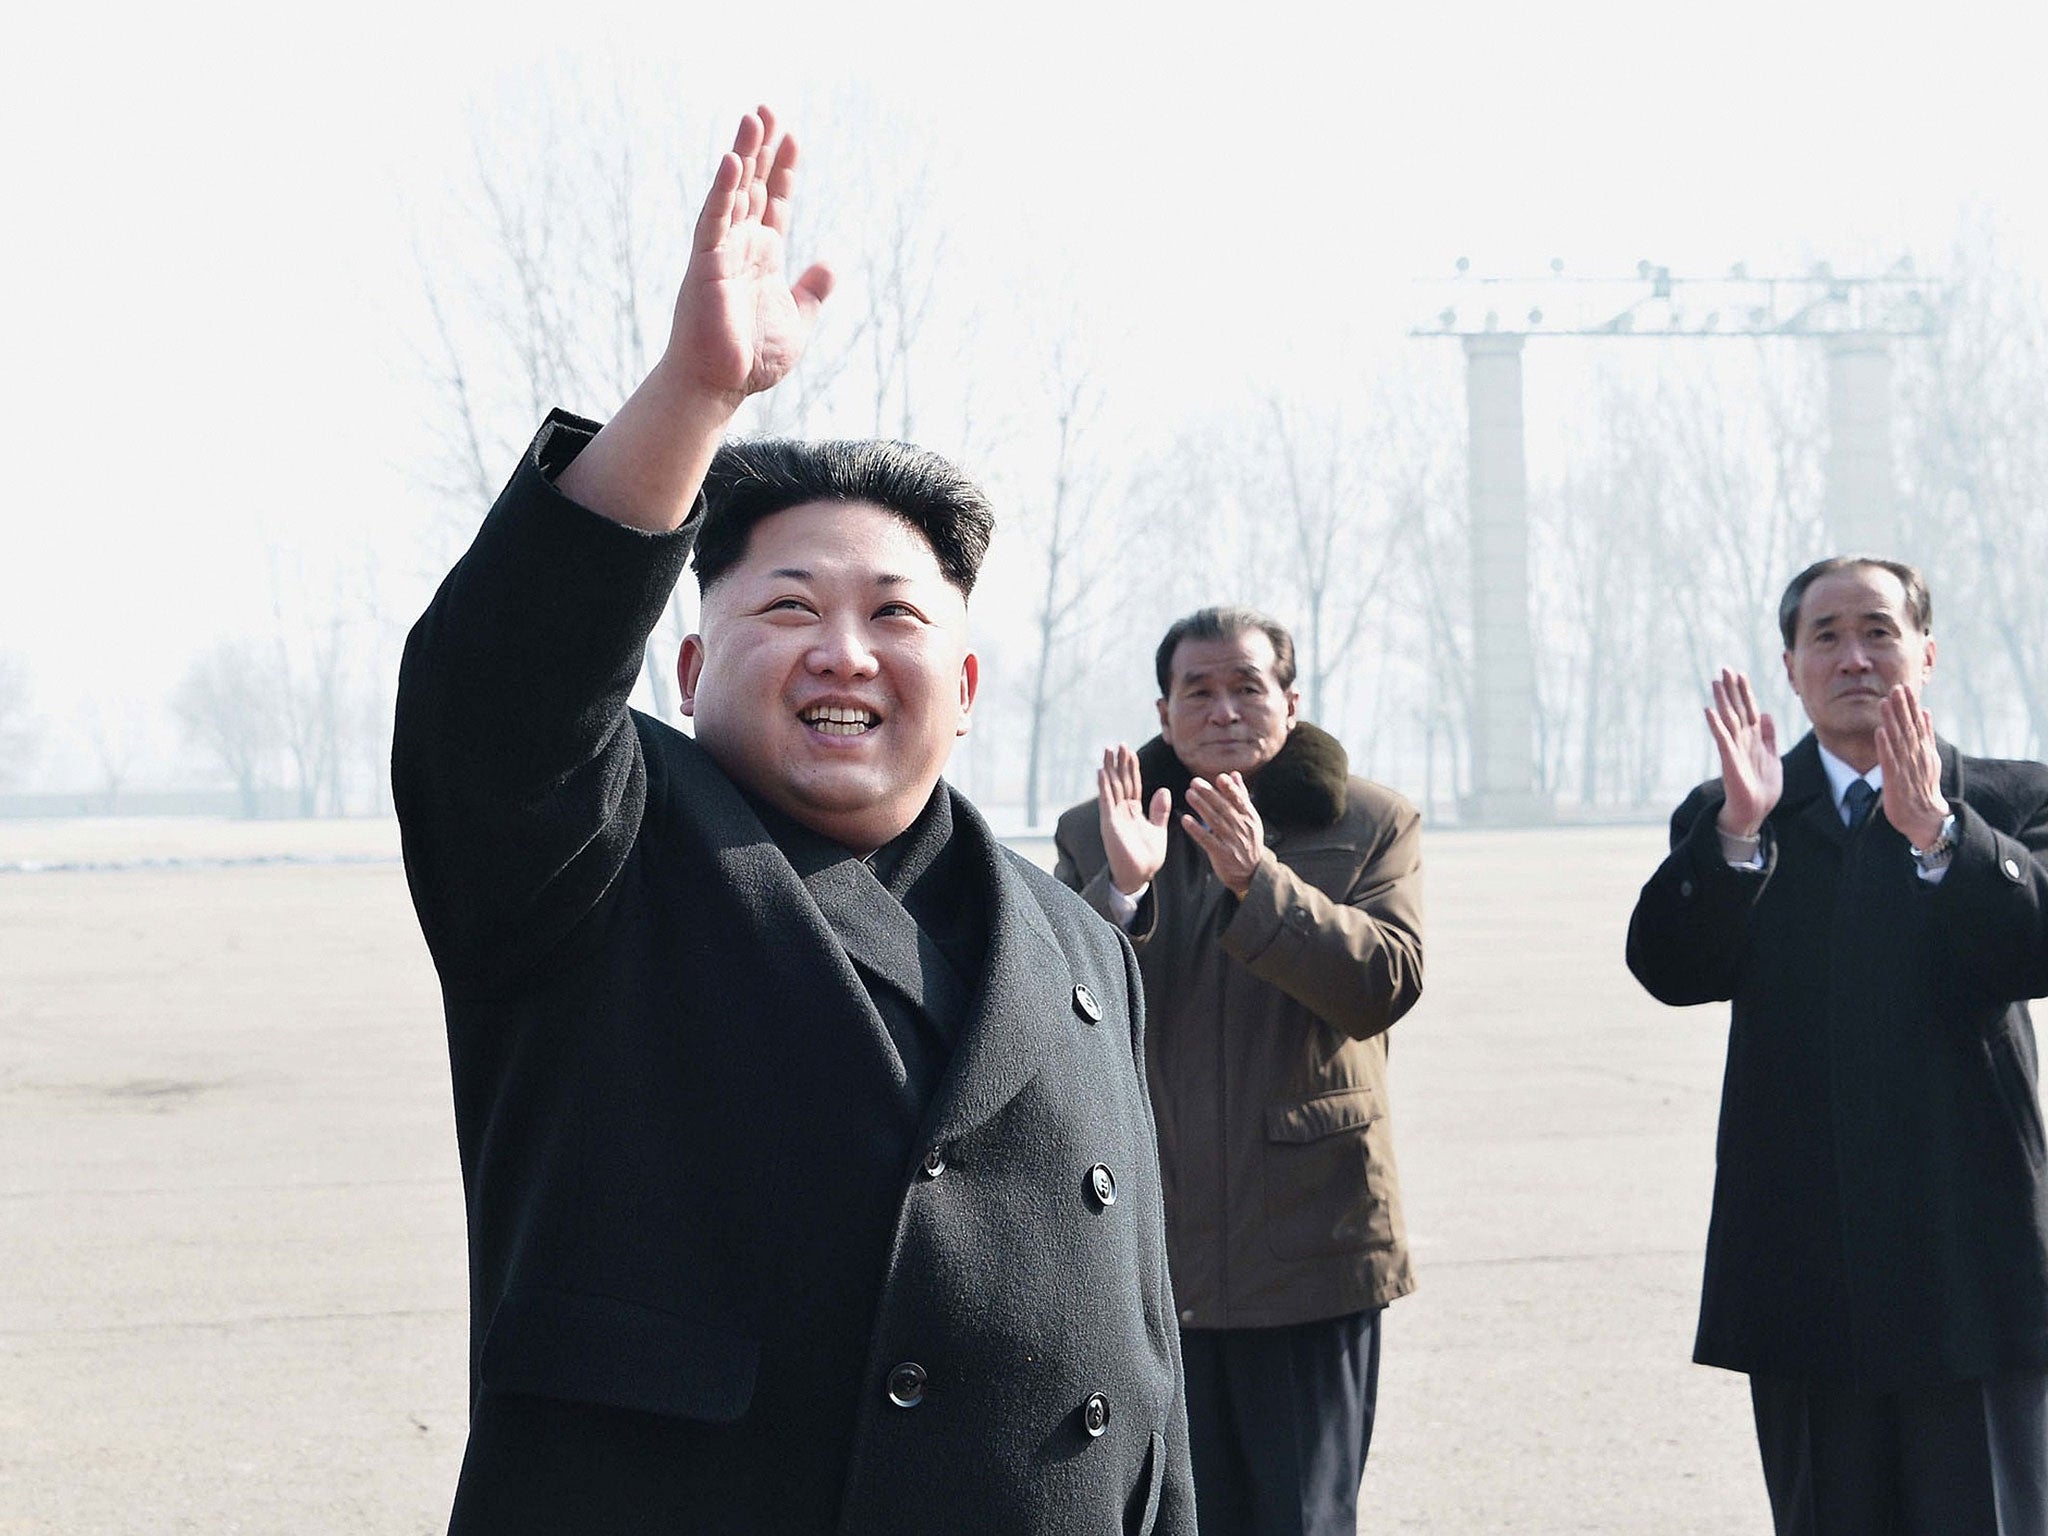 Kim Jong-un has issued 310 new exclamation-heavy slogans